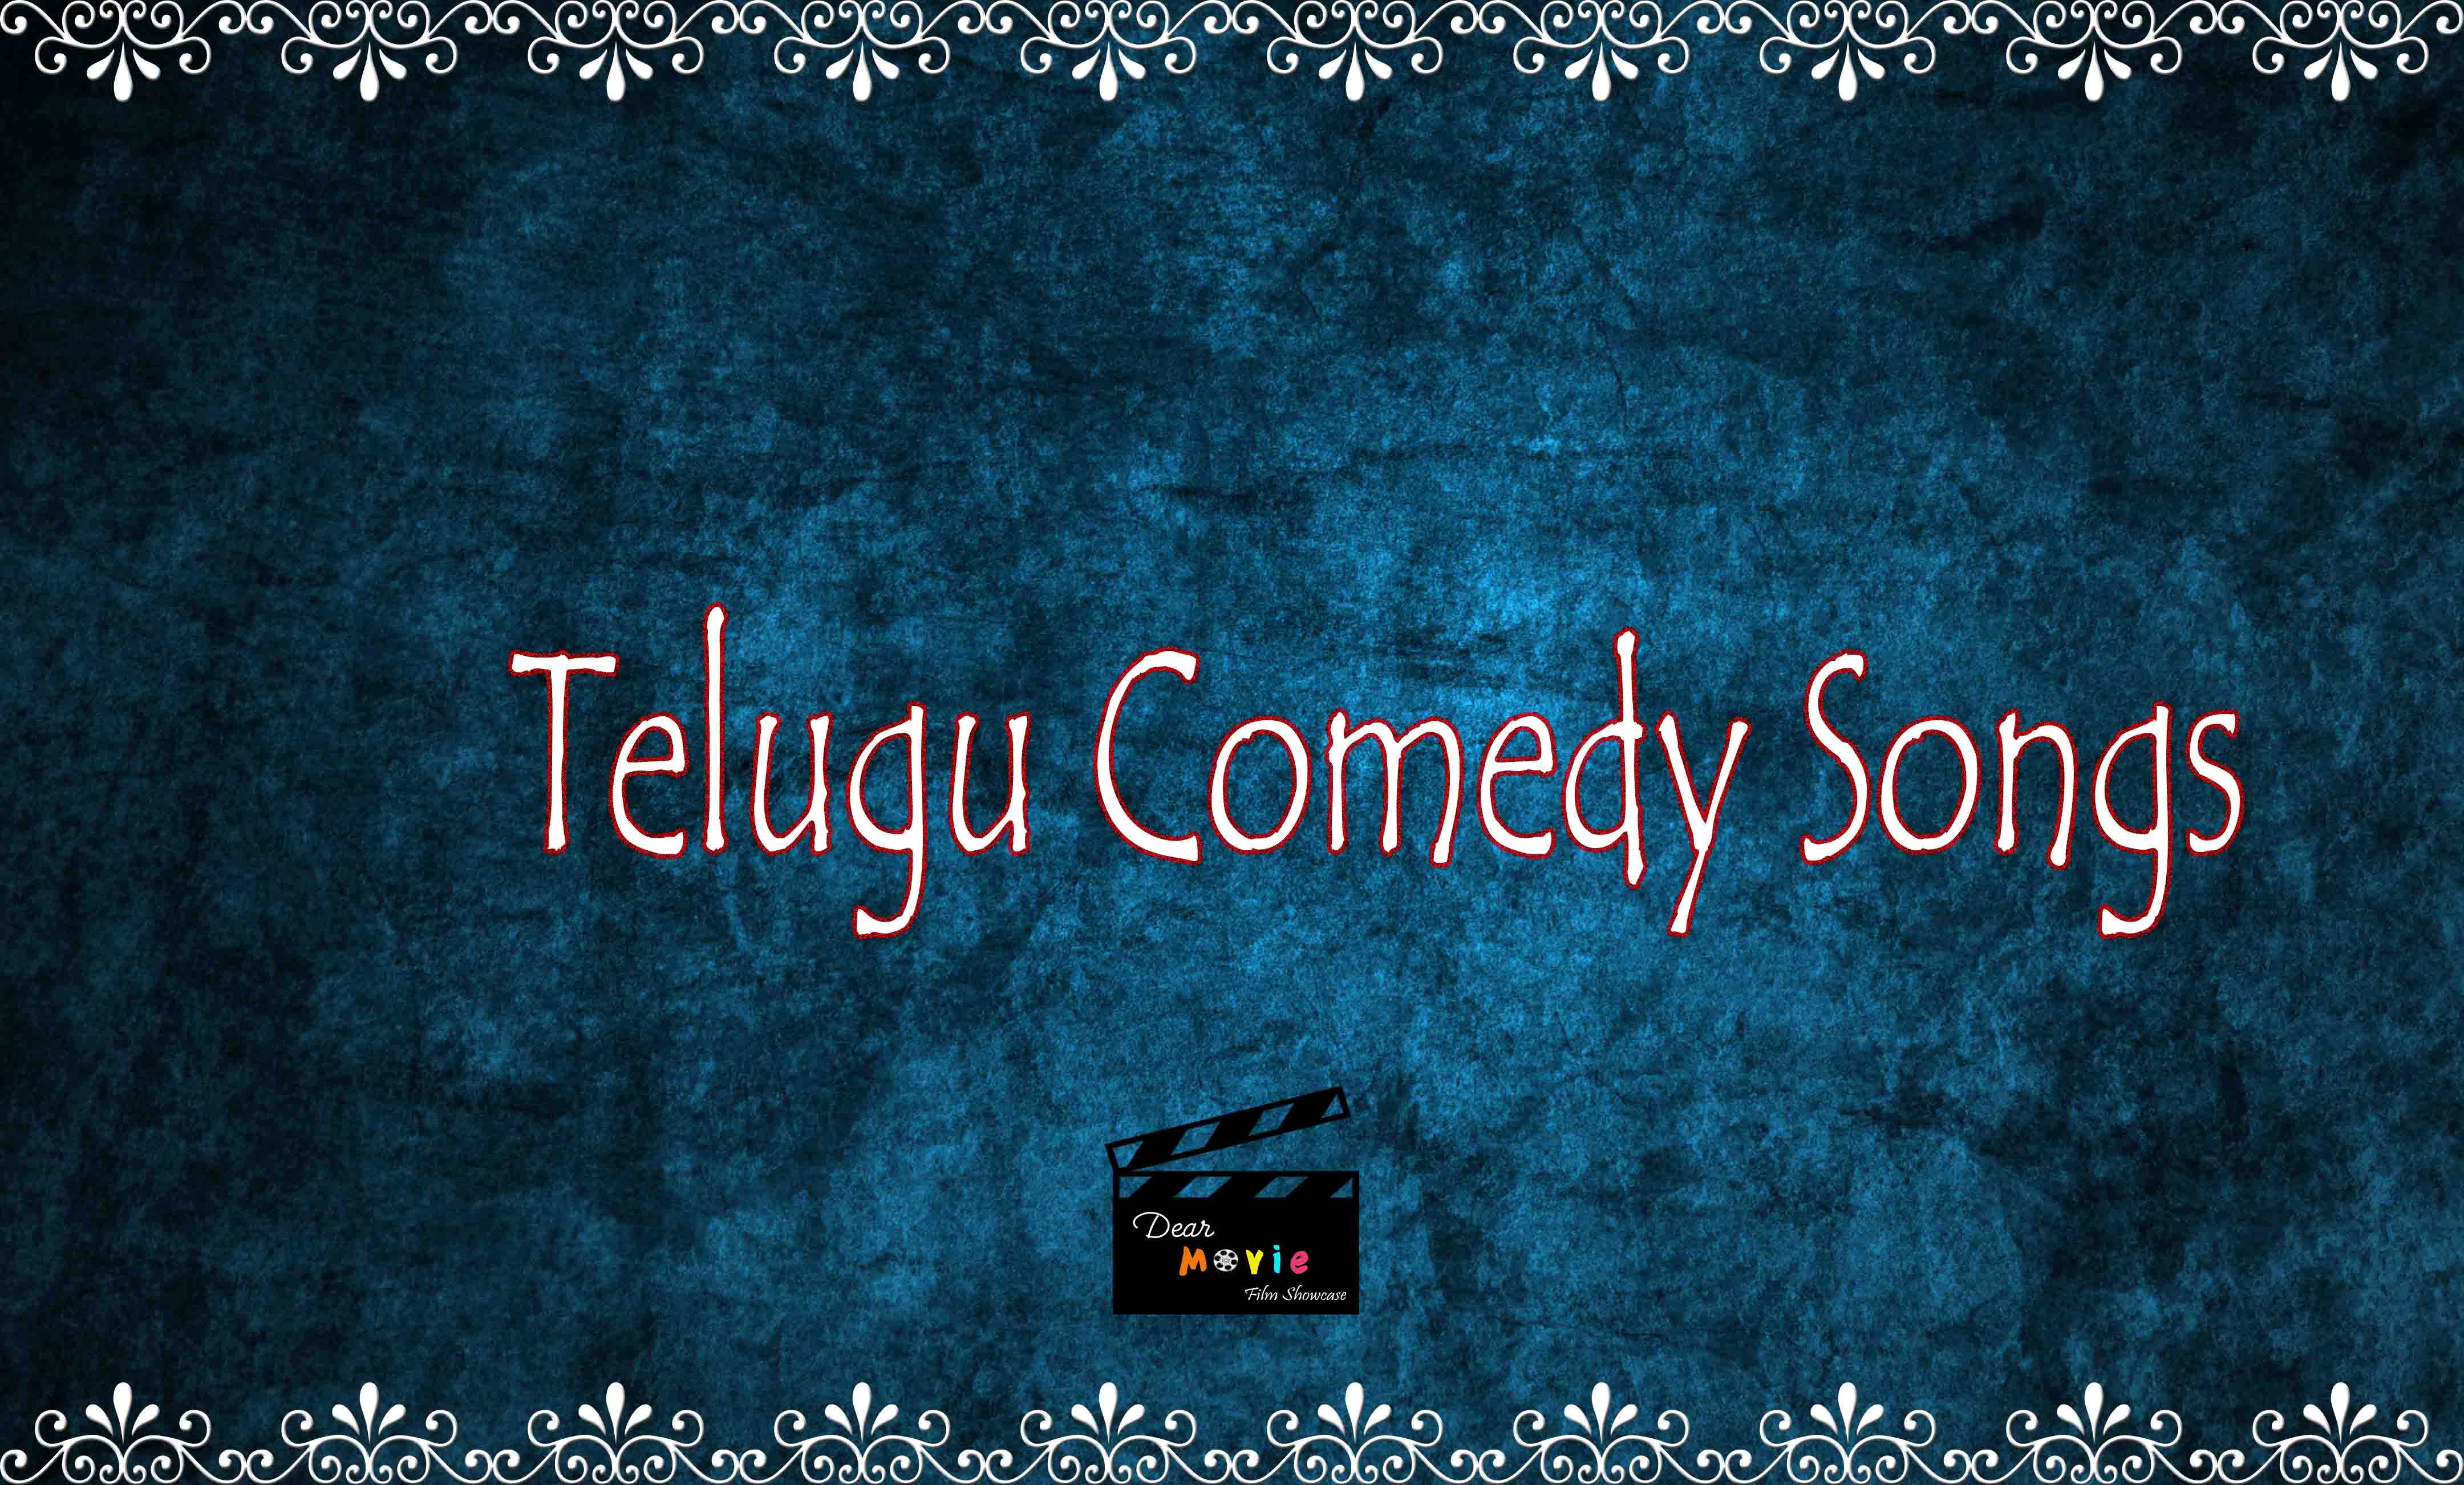 Telugu Comedy Songs | Comedy Songs in Tollywood